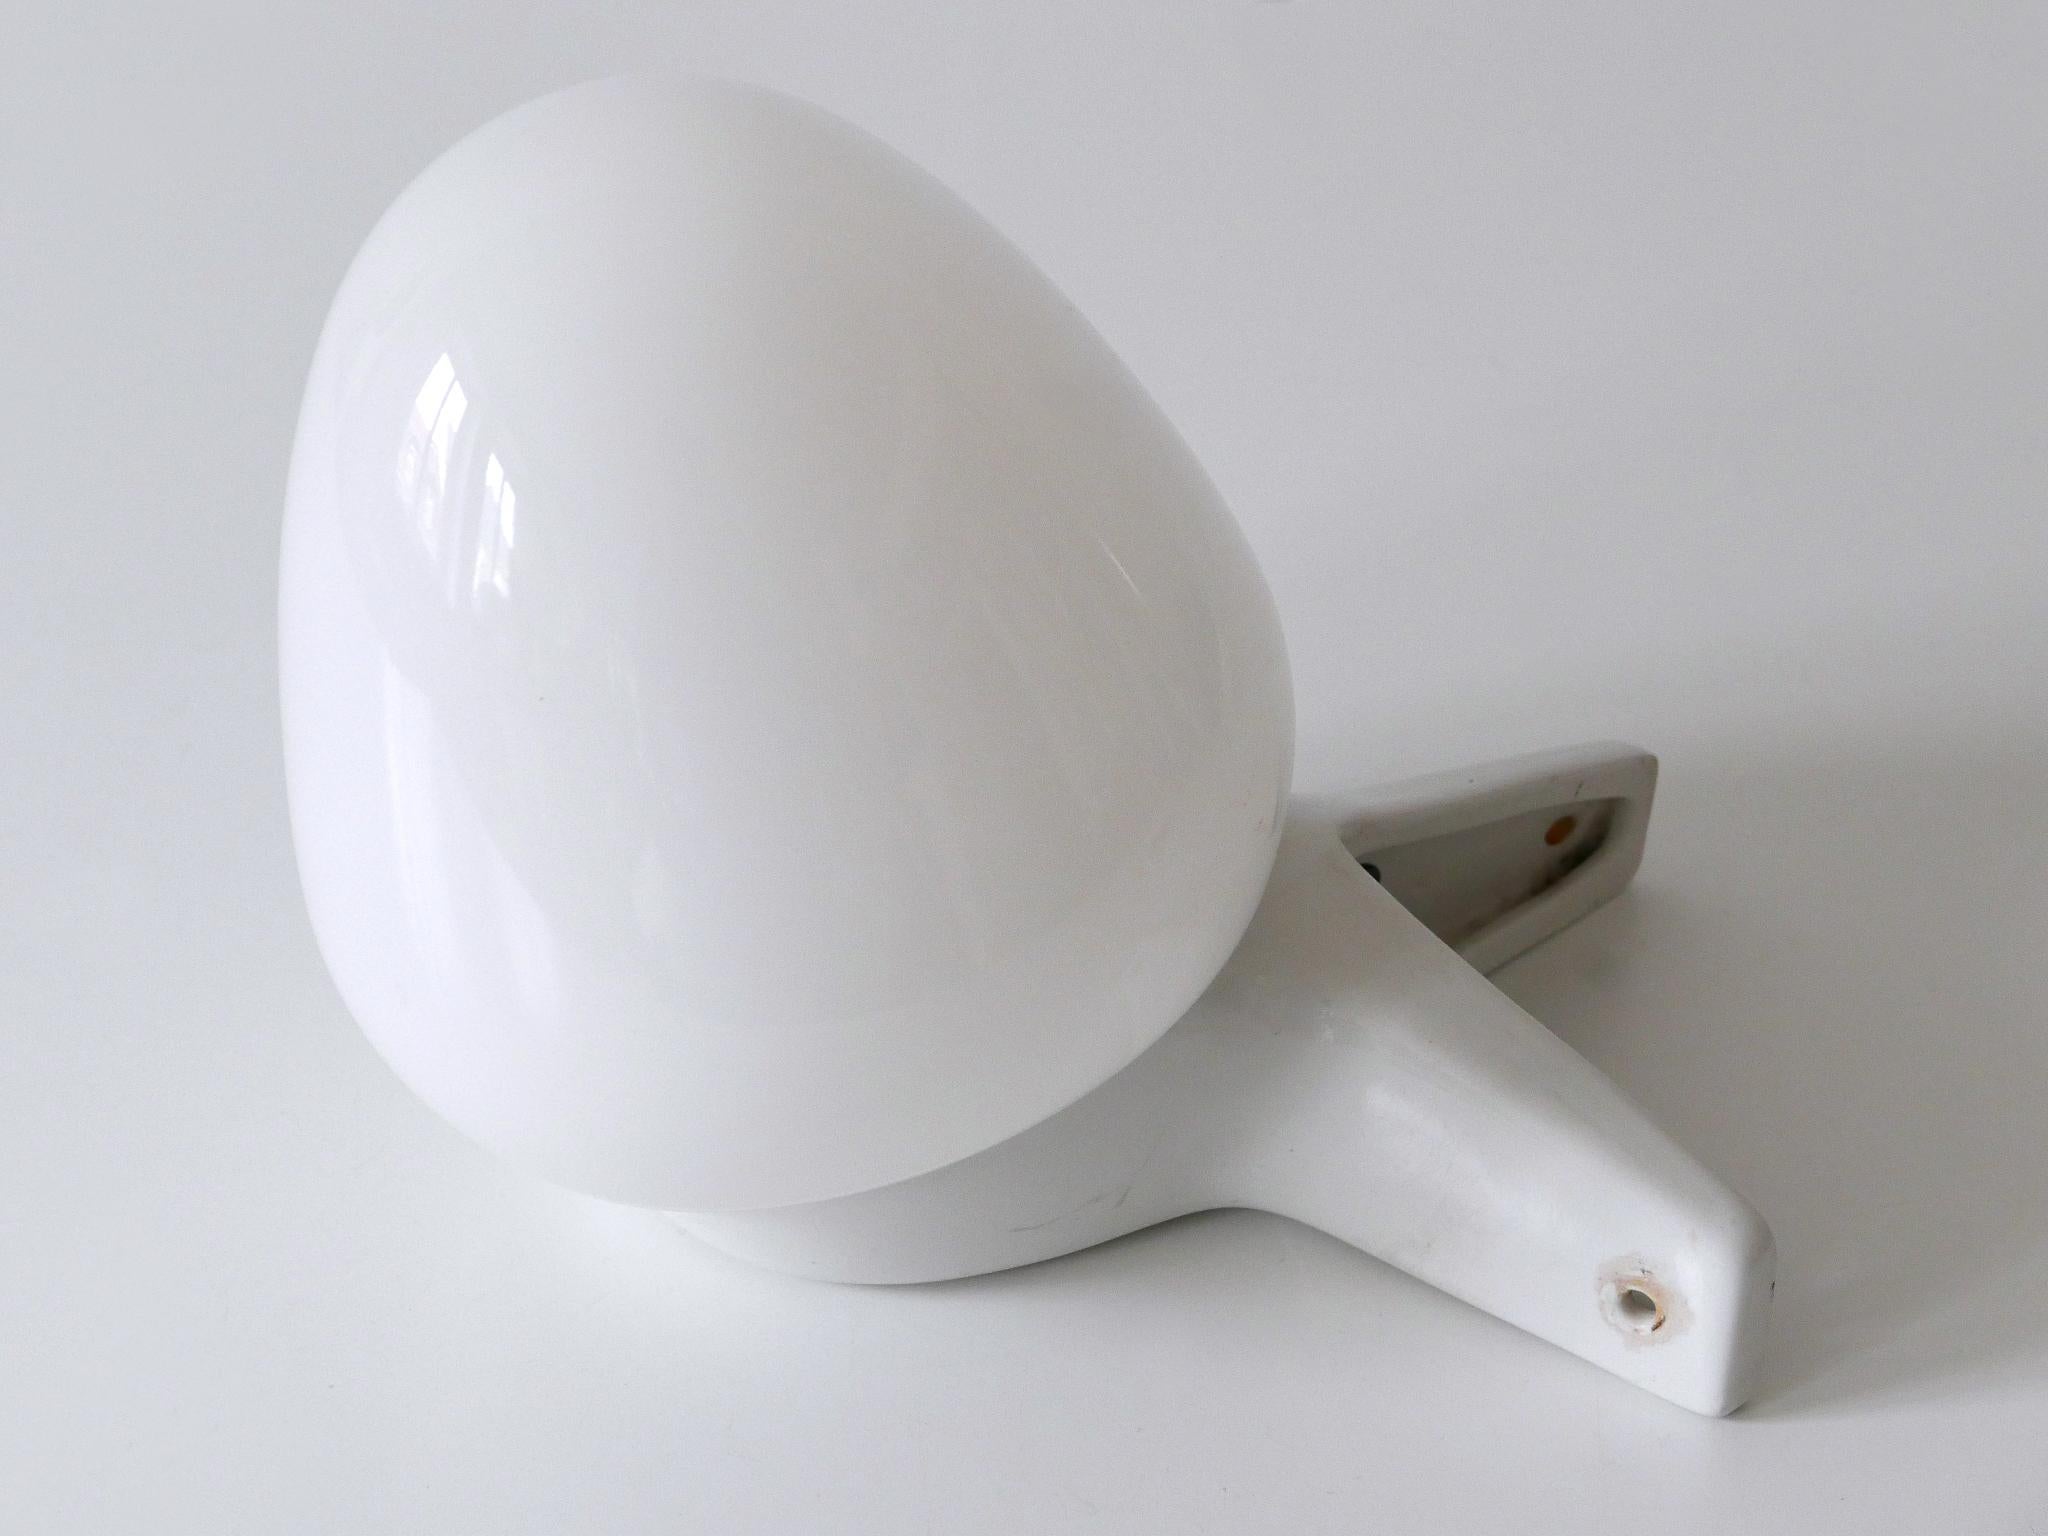 Mid-20th Century Mid-Century Modern Wall Lamp or Sconce by Wilhelm Wagenfeld for Lindner 1950s For Sale